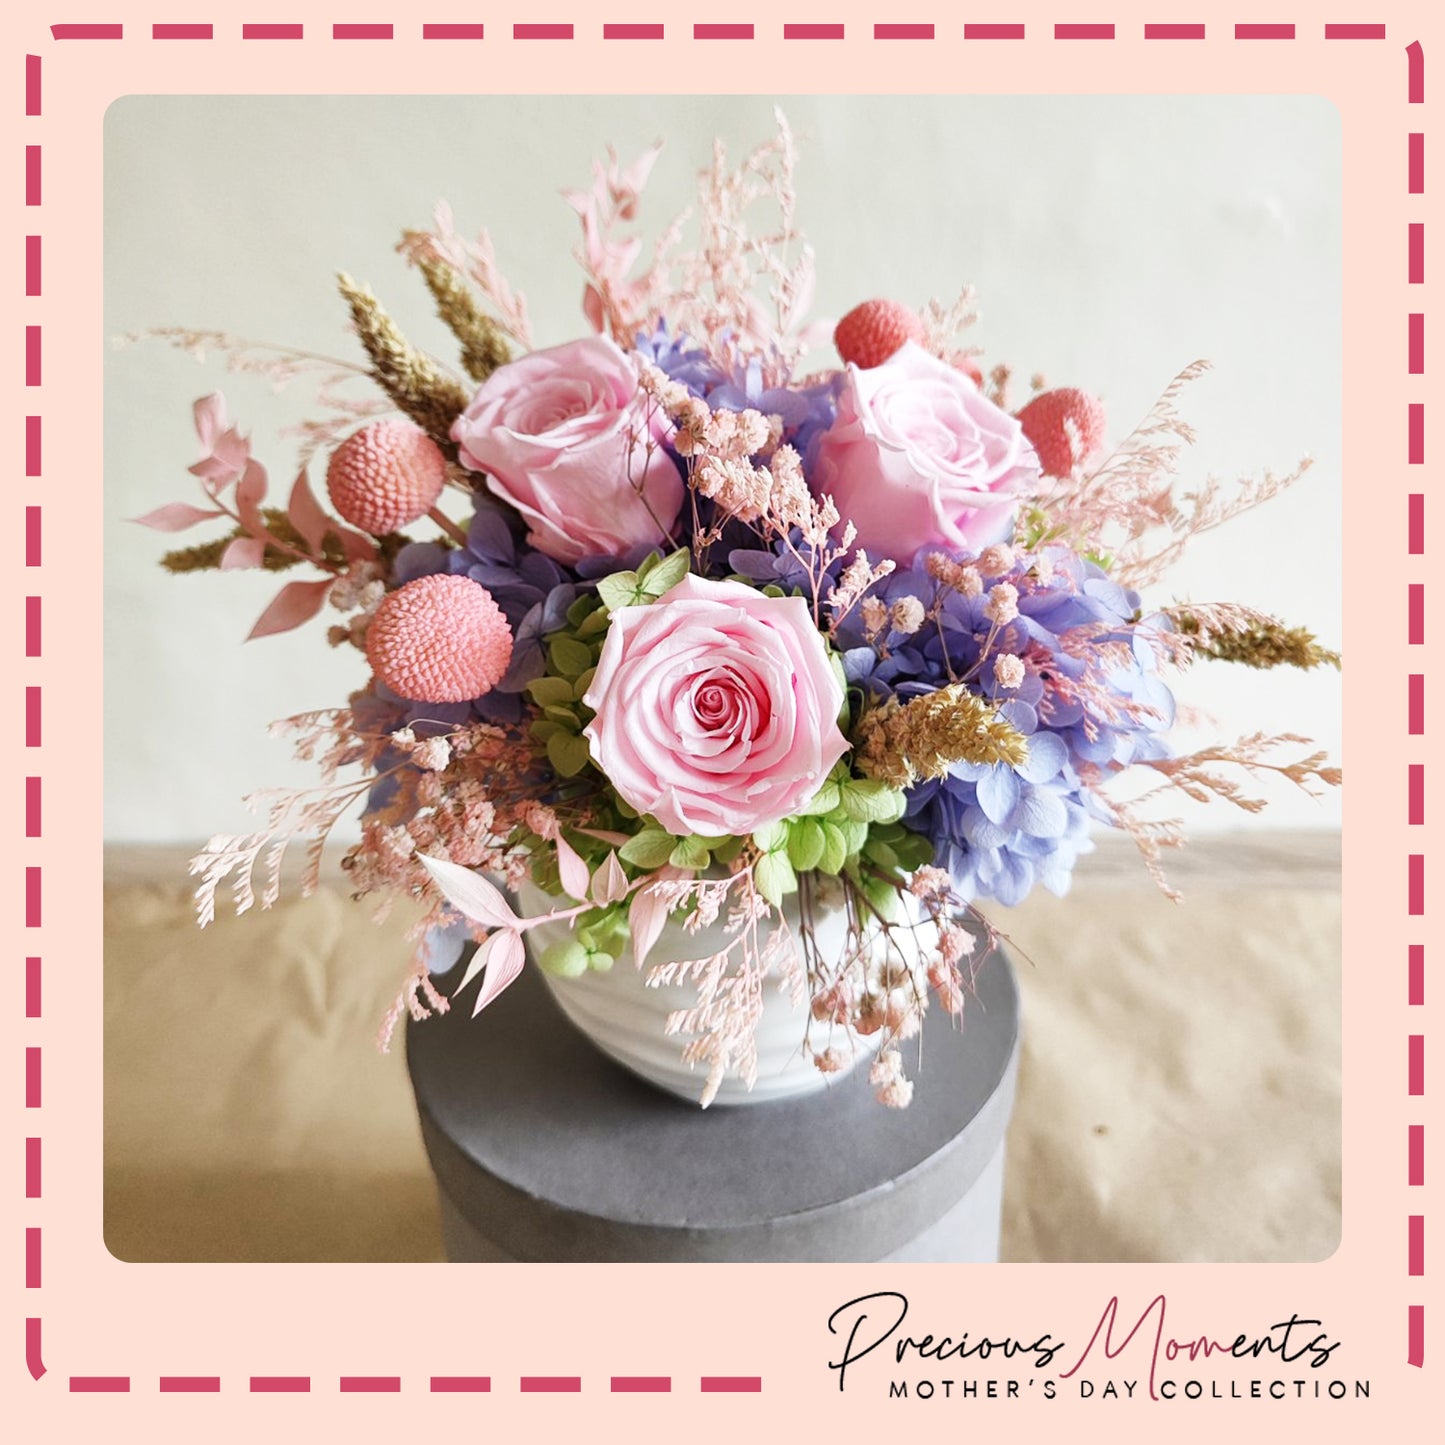 Precious Moments Dried Potted Blooms